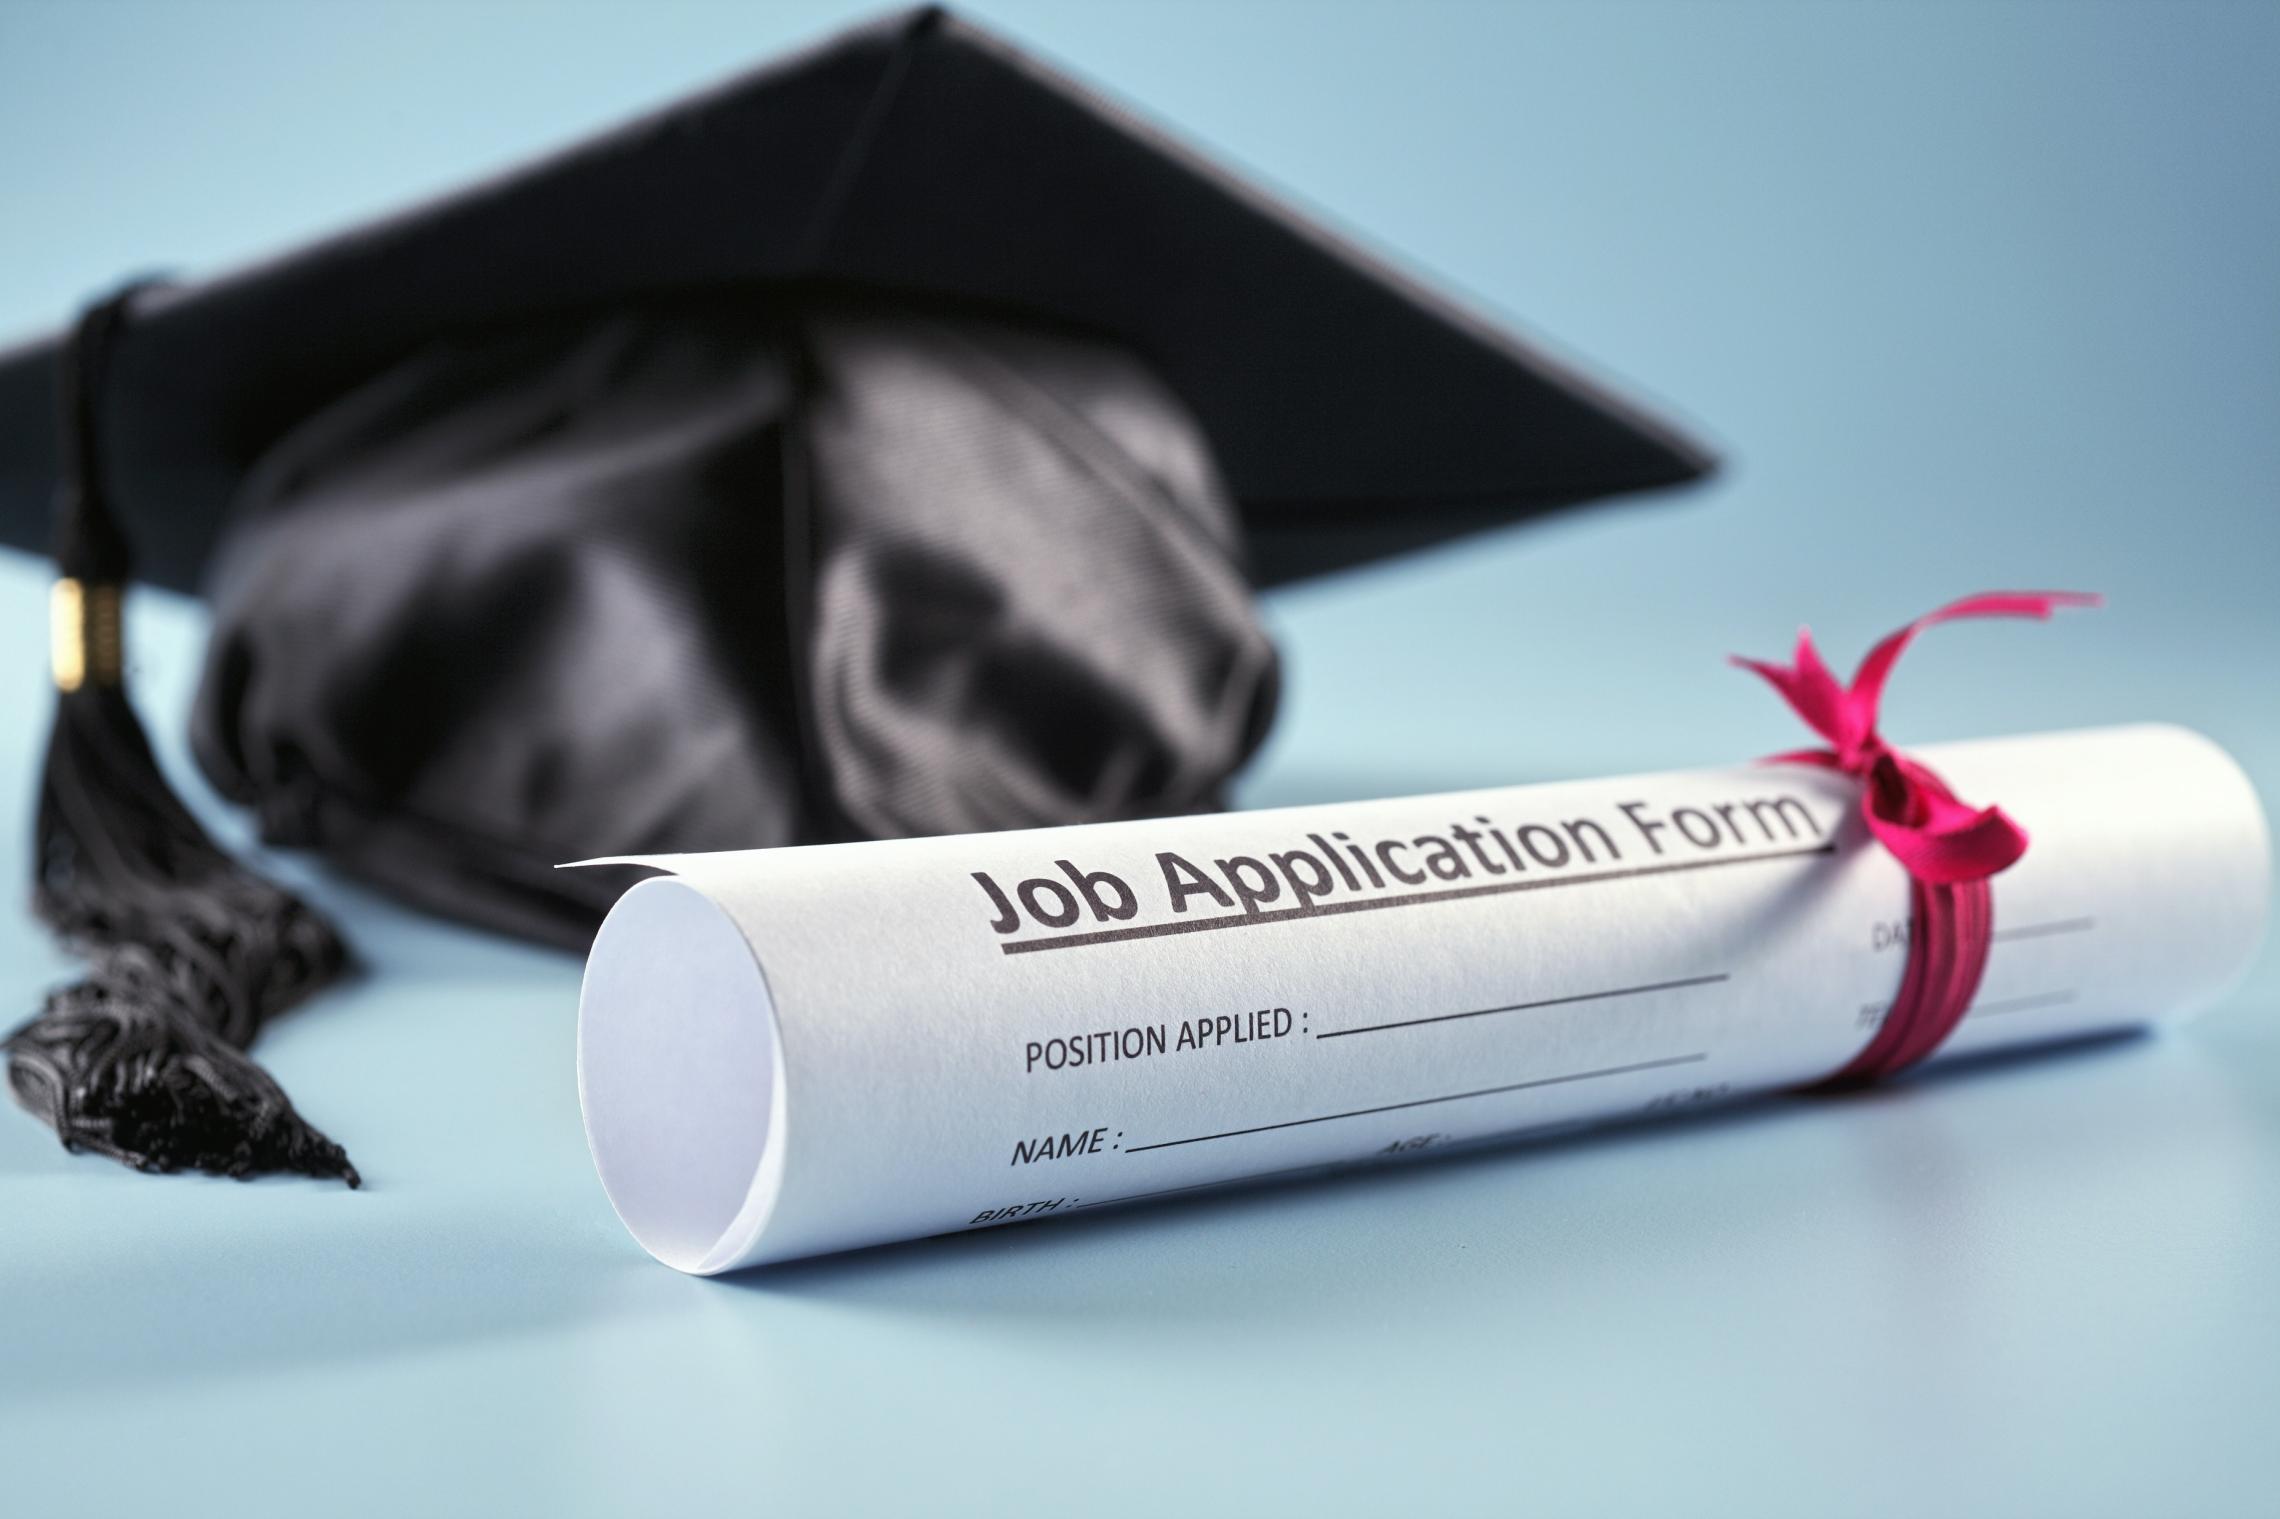 Hints, tips and pitfalls for graduates in getting their first job